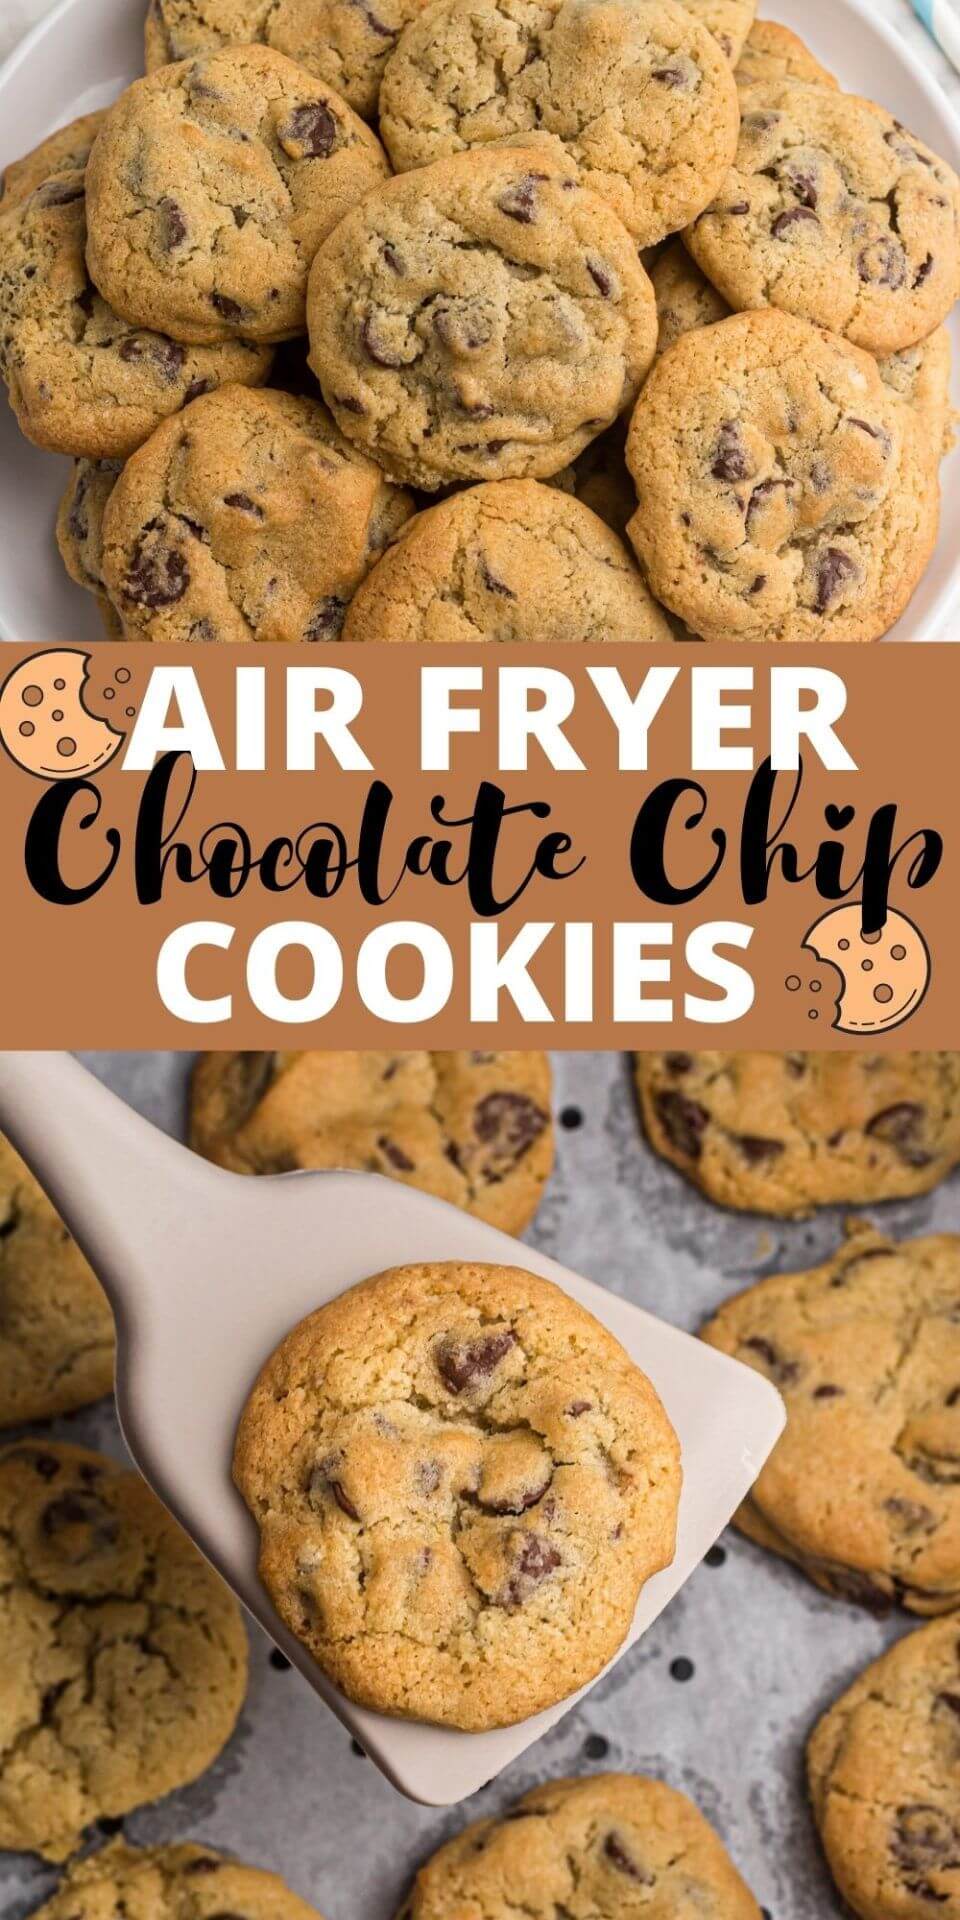 Air fryer chocolate chip cookies are a delicious way to make cookies. Buttery warm cookies are ready in just a few minutes in the air fryer.